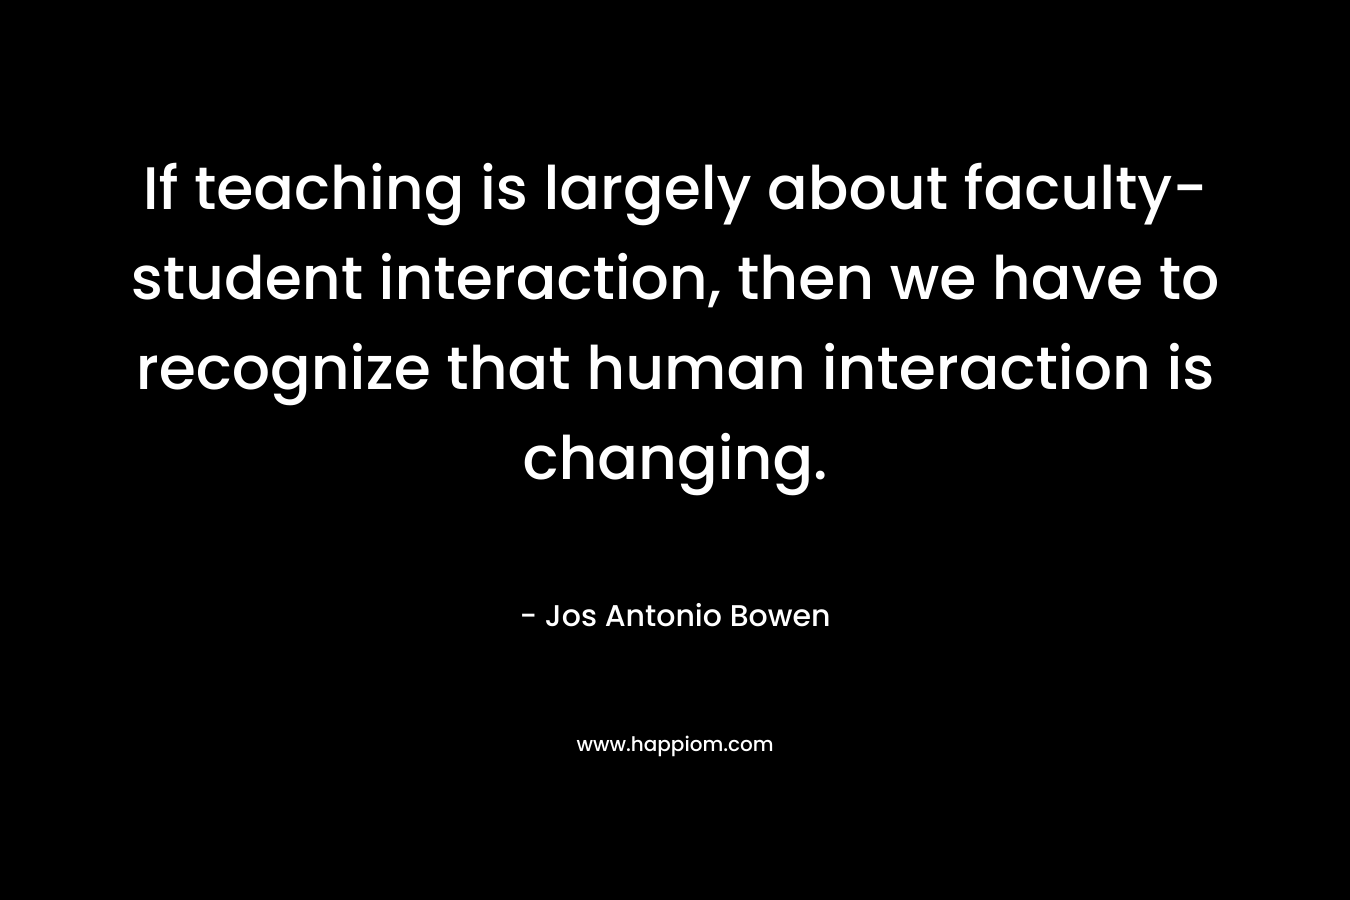 If teaching is largely about faculty-student interaction, then we have to recognize that human interaction is changing.